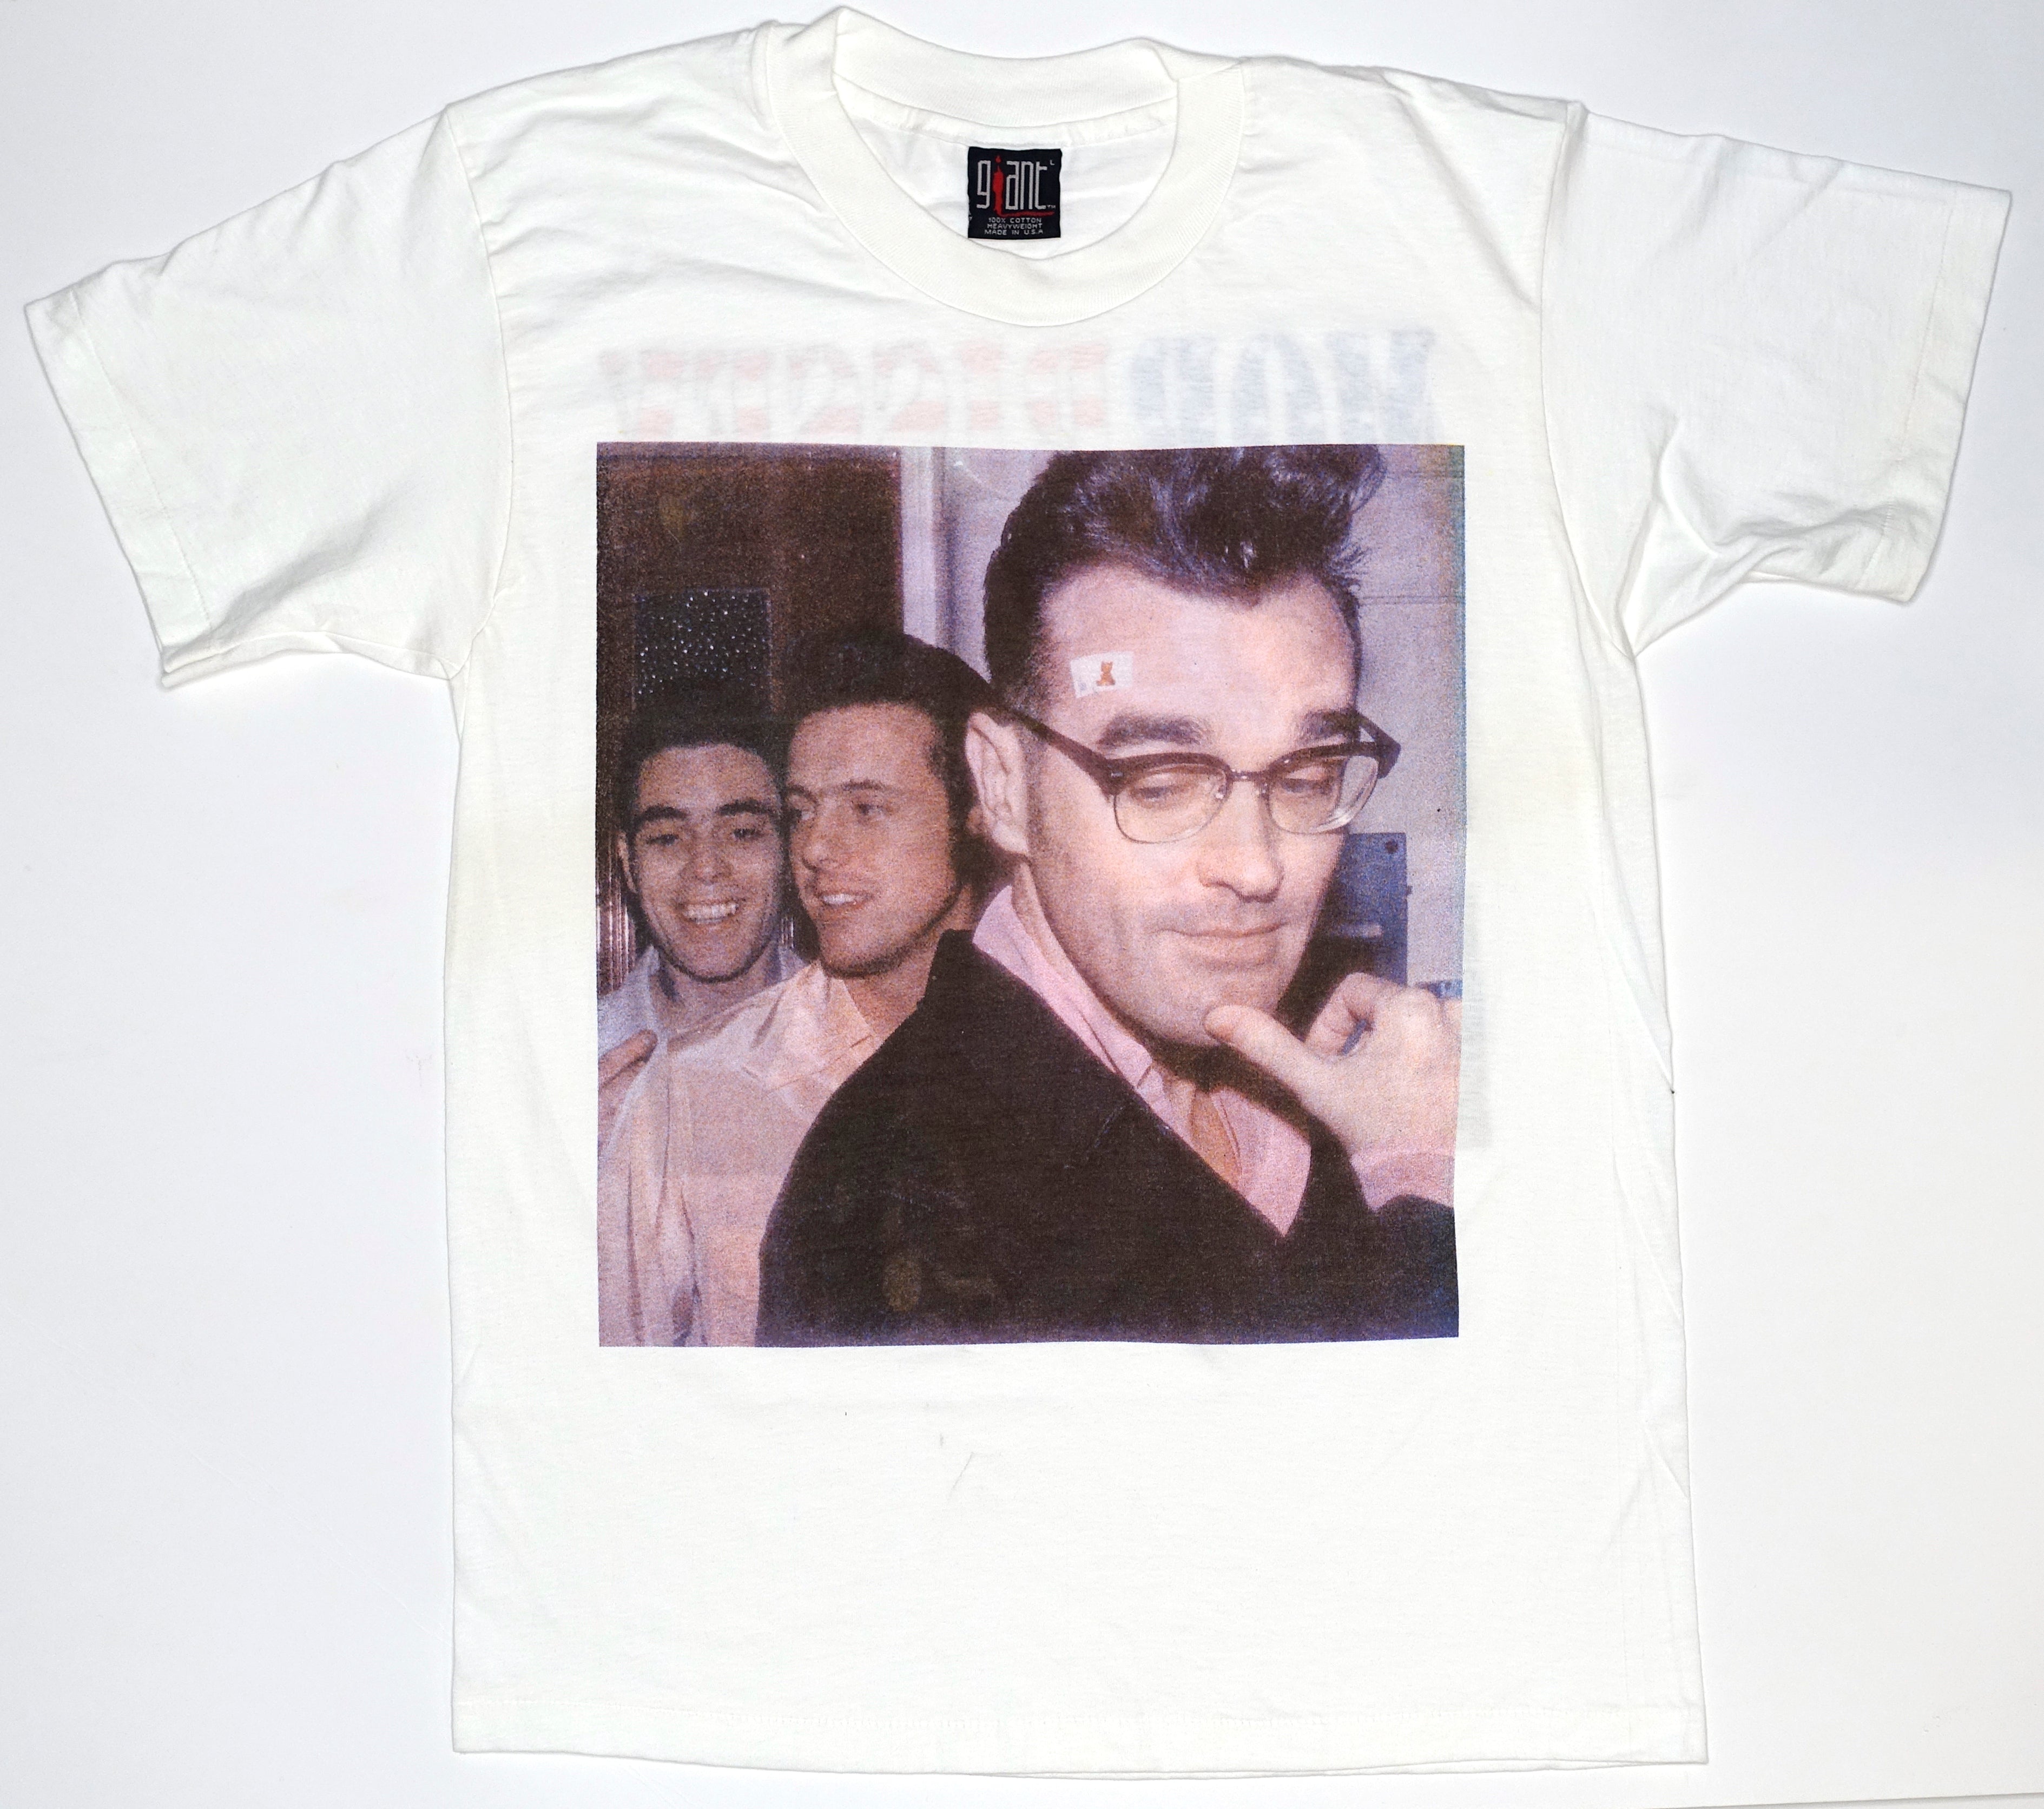 Morrissey - We Hate It When our Friends Become Successful US Tour Shirt Size Large